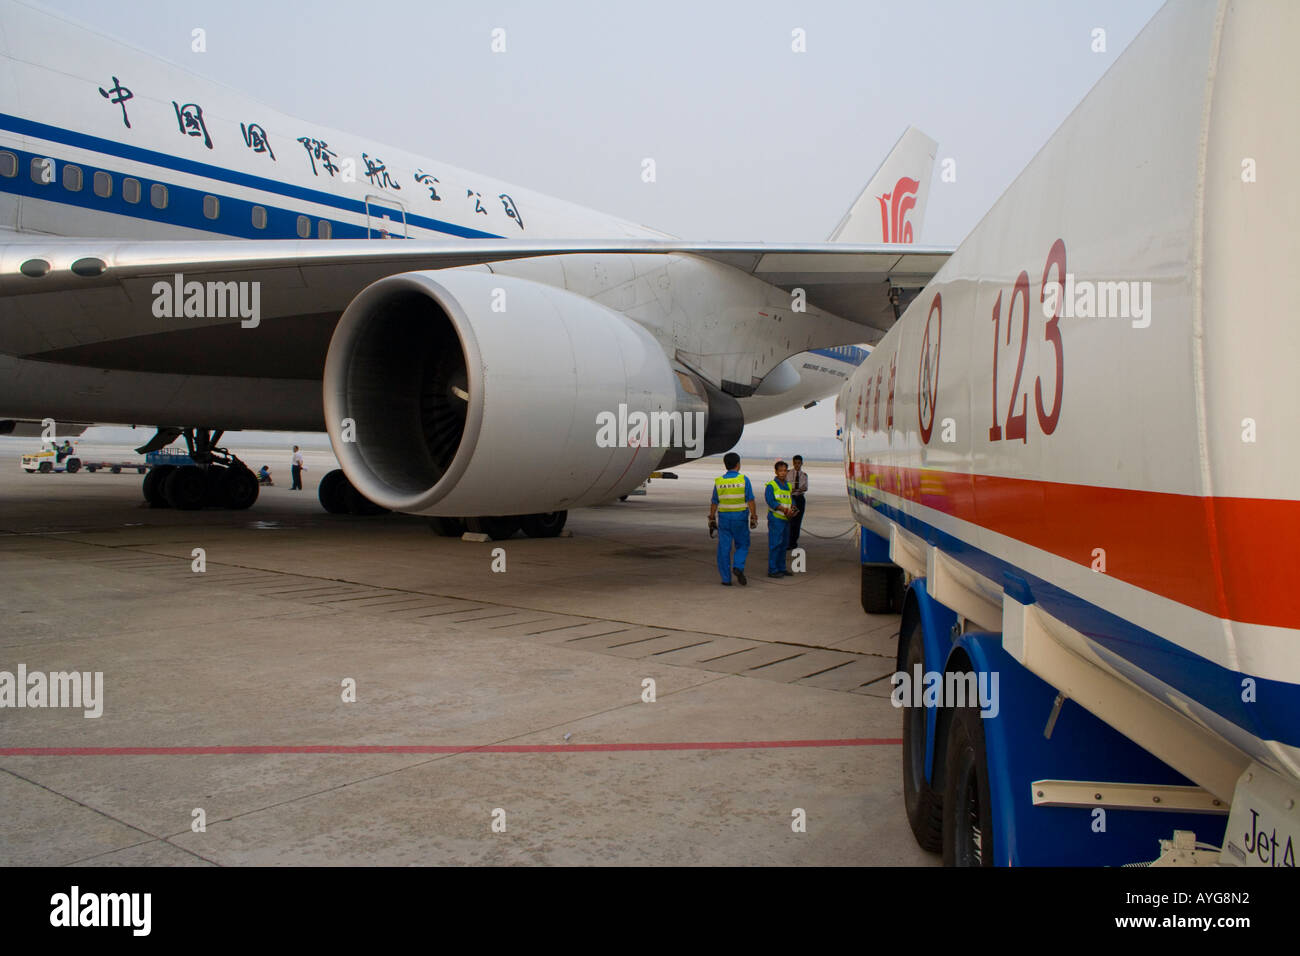 Ground Crew Refueling a China Air Airplane  from a Fuel Truck Capital China International  Airport Beijing China PEK BJS Stock Photo